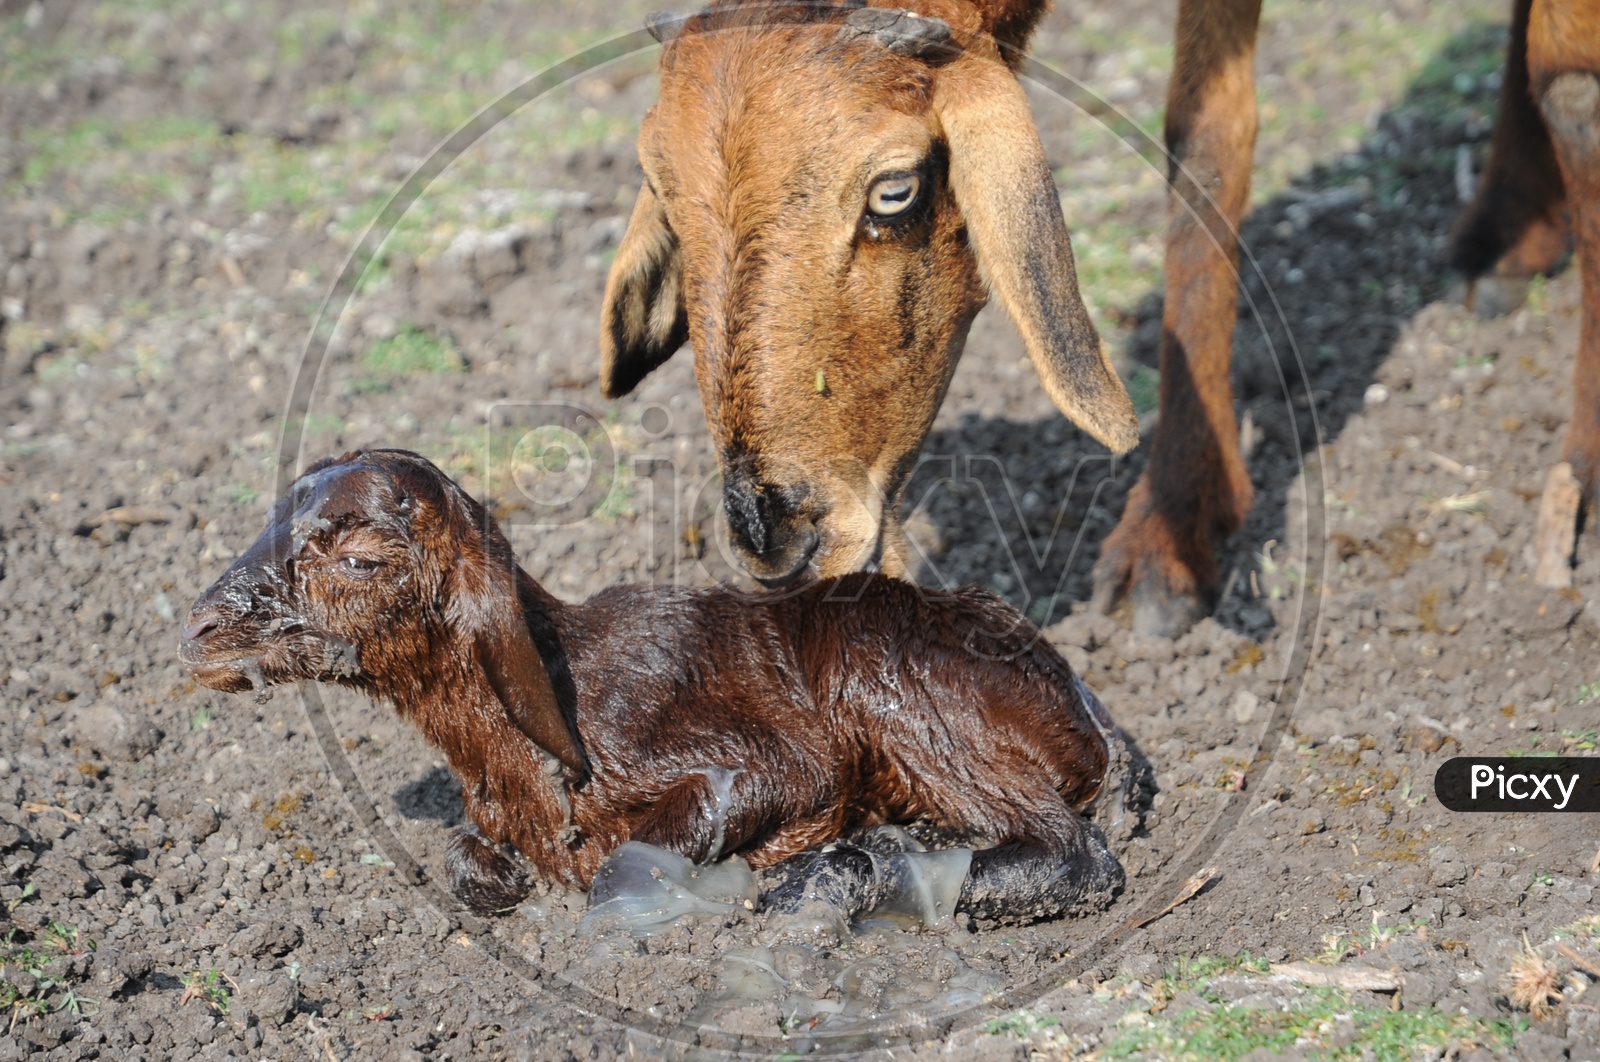 Newborn Goat being licked clean by its Mother